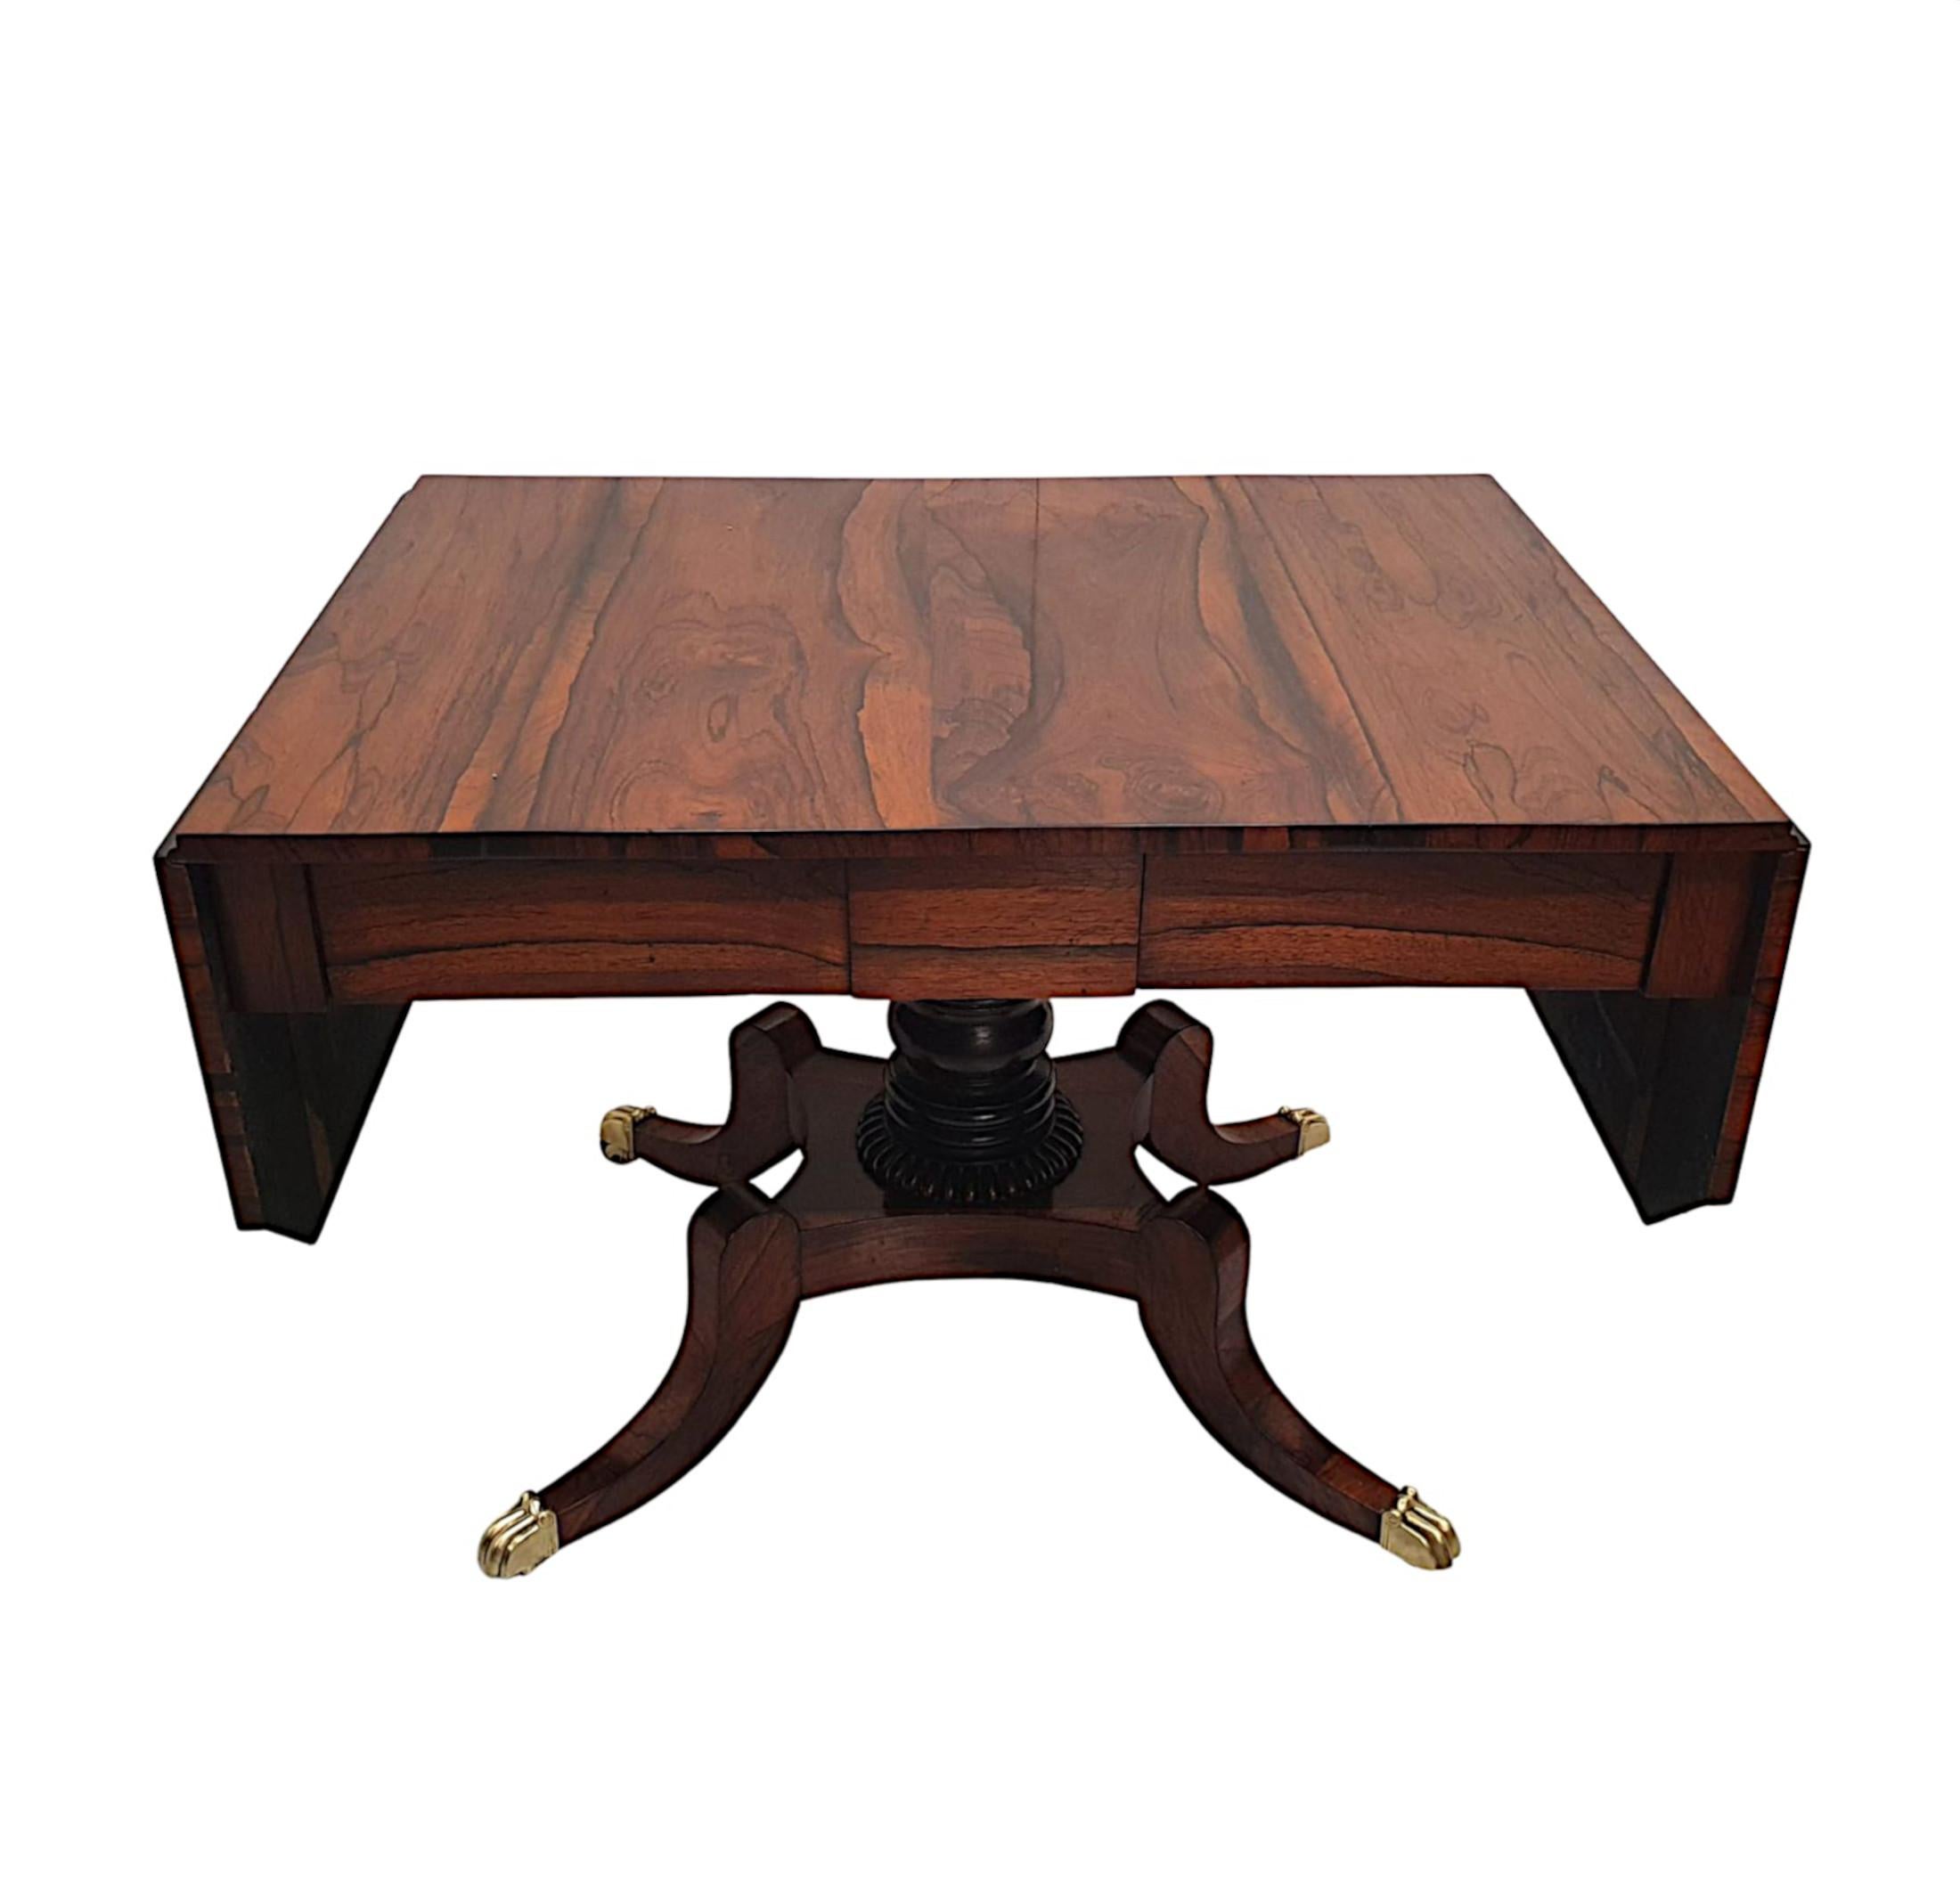 A very fine early 19th century Regency fruitwood sofa table, beautifully hand carved and of gorgeous quality with rich patination and grain. The well figured, moulded top of rectangular form with twin hinged drop leaves and canted corners, raised